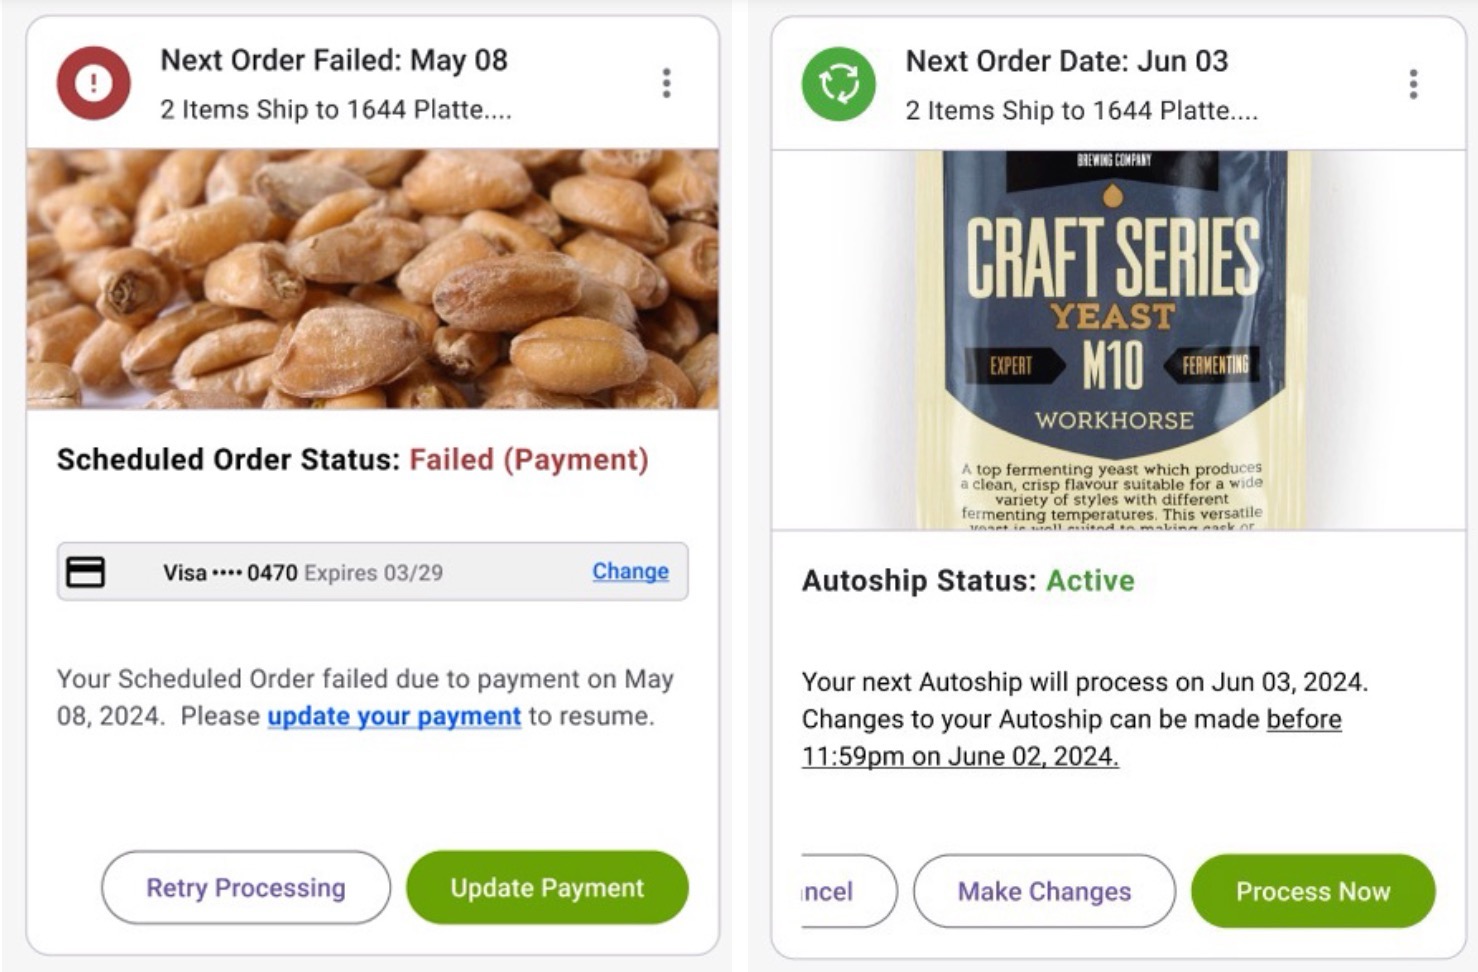 Pictured: (Left) A subscriber sees a helpful message and is prompted with suggested actions to recover a Scheduled Order that failed to process due to a payment issue. (Right) A subscriber sees details about an upcoming Scheduled Order.